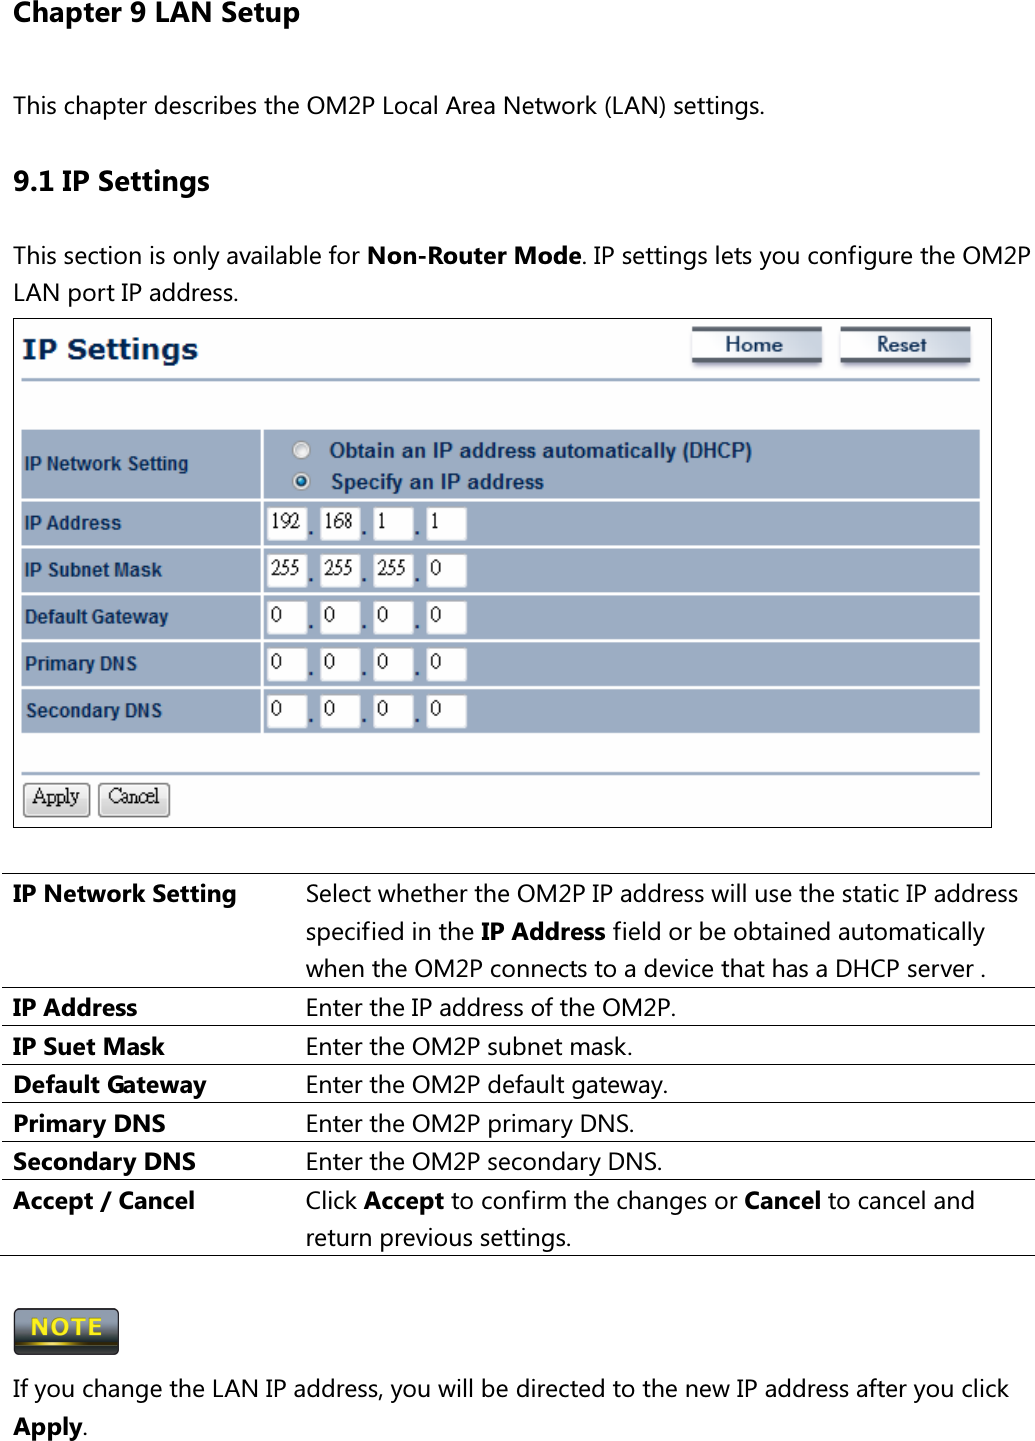 Chapter 9 LAN Setup This chapter describes the OM2P Local Area Network (LAN) settings. 9.1 IP Settings This section is only available for Non-Router Mode. IP settings lets you configure the OM2P LAN port IP address.   IP Network Setting  Select whether the OM2P IP address will use the static IP address specified in the IP Address field or be obtained automatically when the OM2P connects to a device that has a DHCP server . IP Address  Enter the IP address of the OM2P. IP Suet Mask  Enter the OM2P subnet mask. Default Gateway  Enter the OM2P default gateway. Primary DNS  Enter the OM2P primary DNS. Secondary DNS  Enter the OM2P secondary DNS. Accept / Cancel  Click Accept to confirm the changes or Cancel to cancel and return previous settings.   If you change the LAN IP address, you will be directed to the new IP address after you click Apply. 